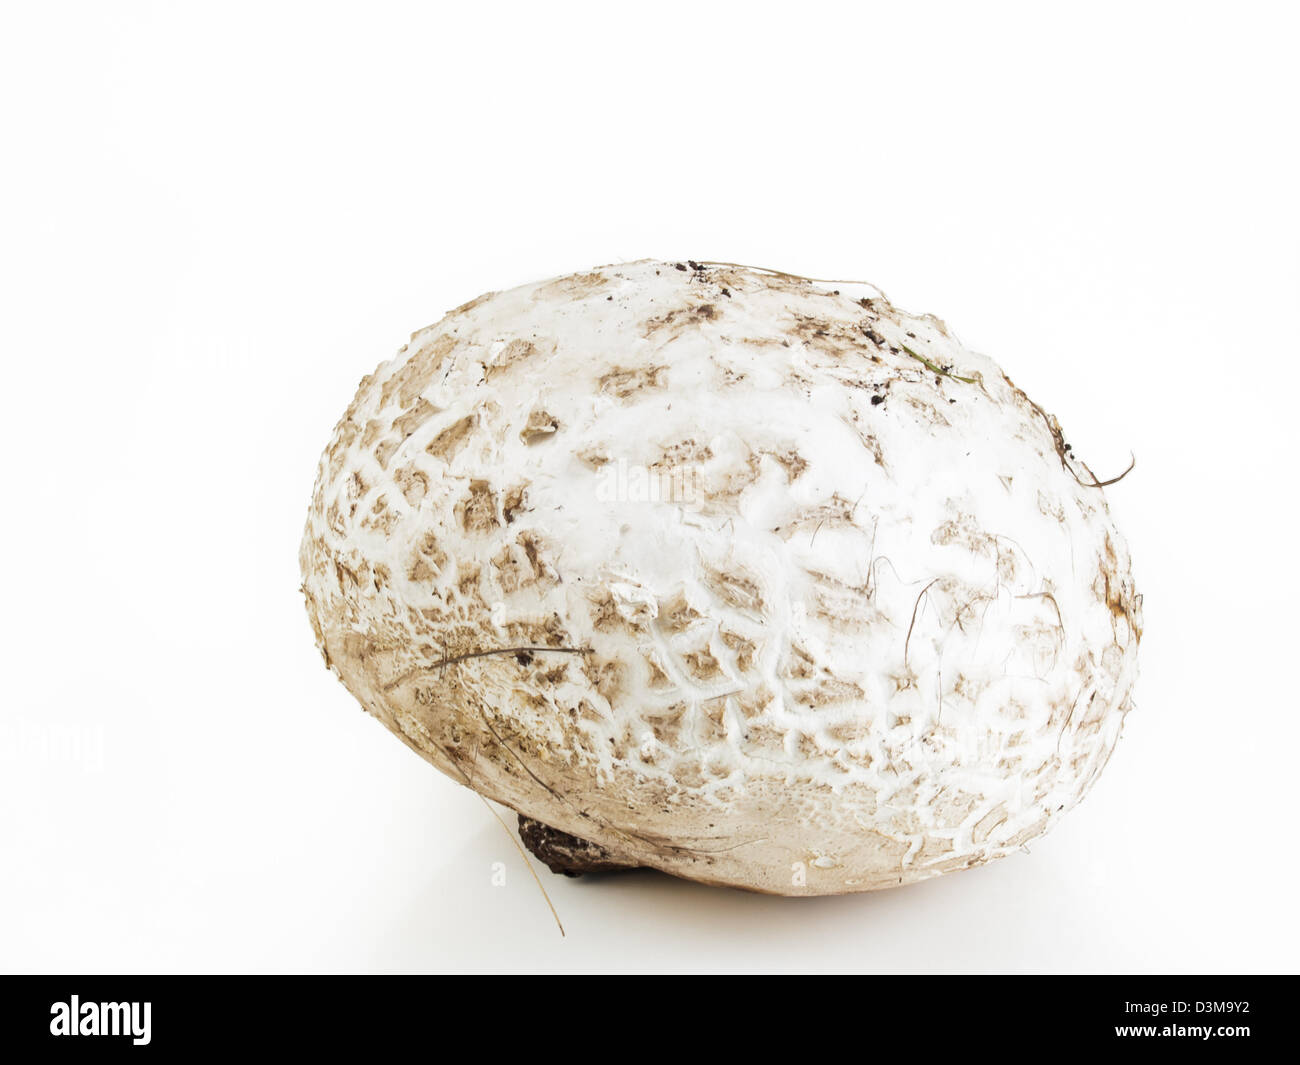 The western giant puffball grows on composted soil such as in meadows, fields, and forests, roadsides, sagebrush flats, pastures, and other sunny places. Stock Photo